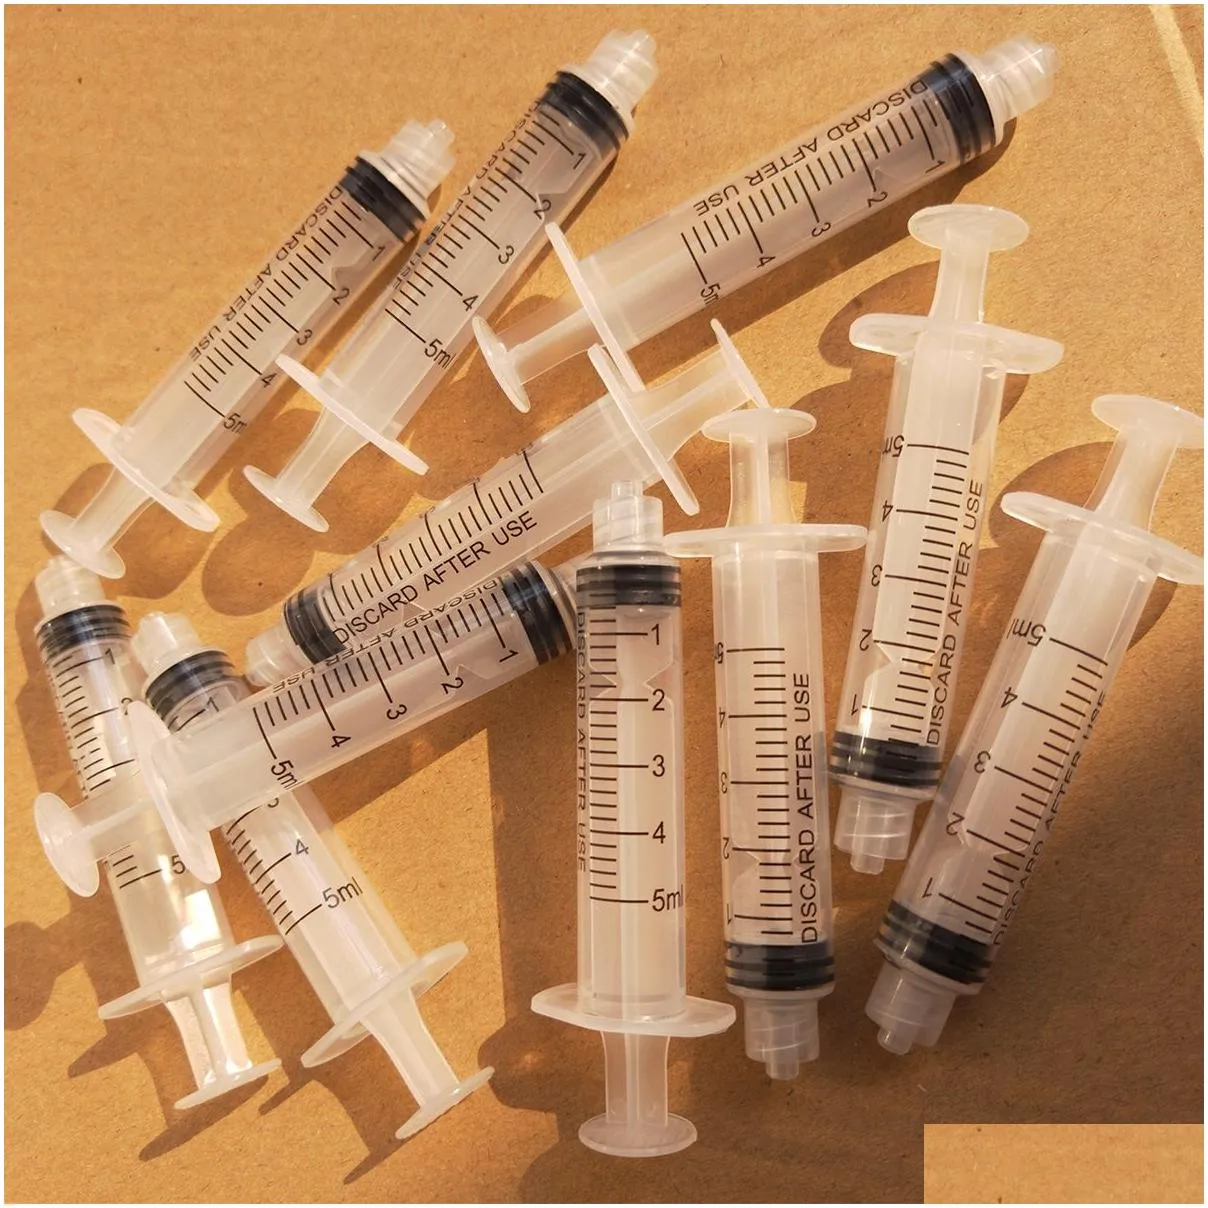 wholesale pack of 50 plastic syringes 1ml 3ml 5ml 10ml for scientific labs and dispensing multiple uses industrial syringe without